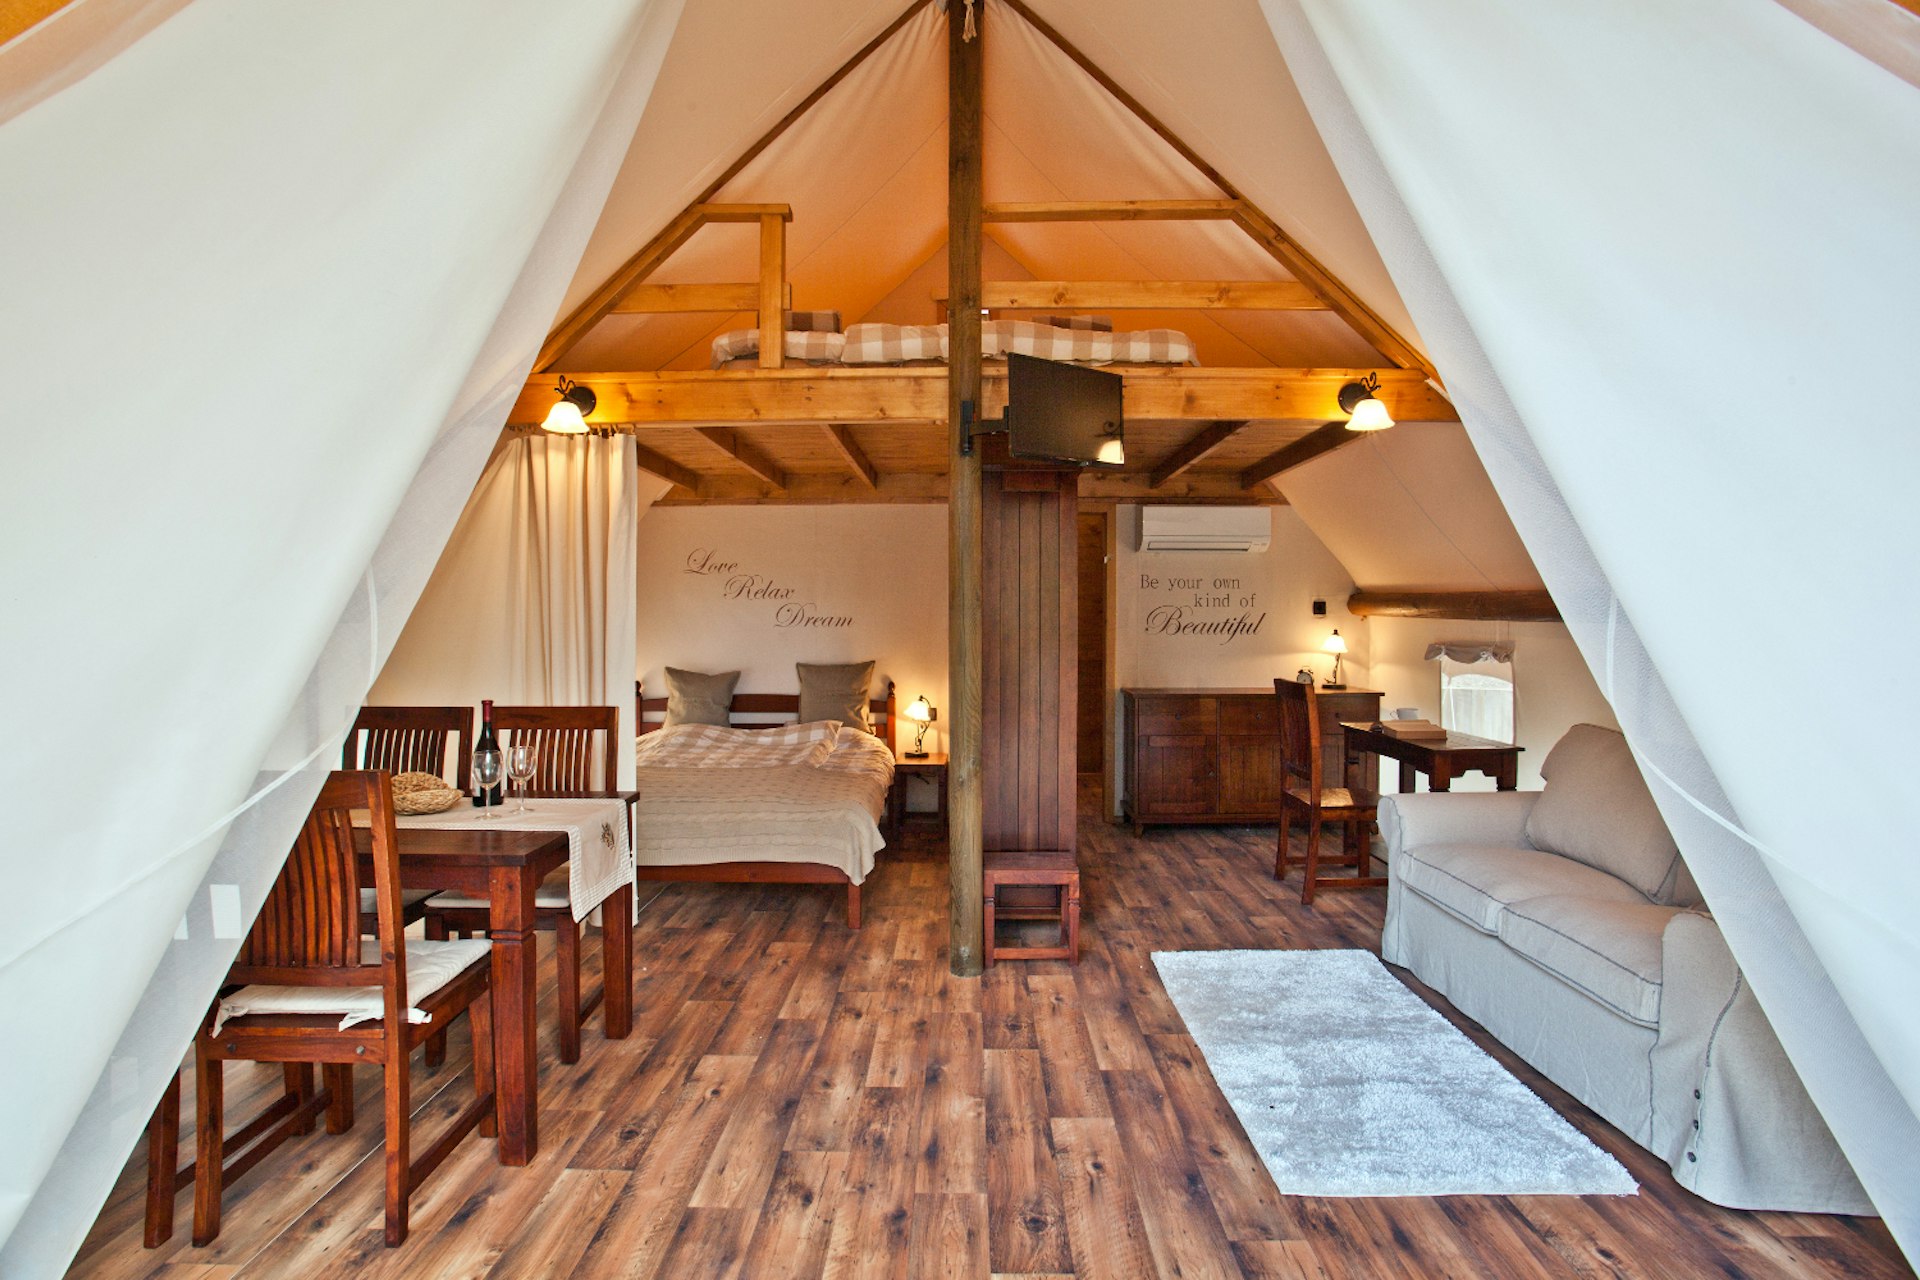 Not your average tent: glamping at Garden Village Bled